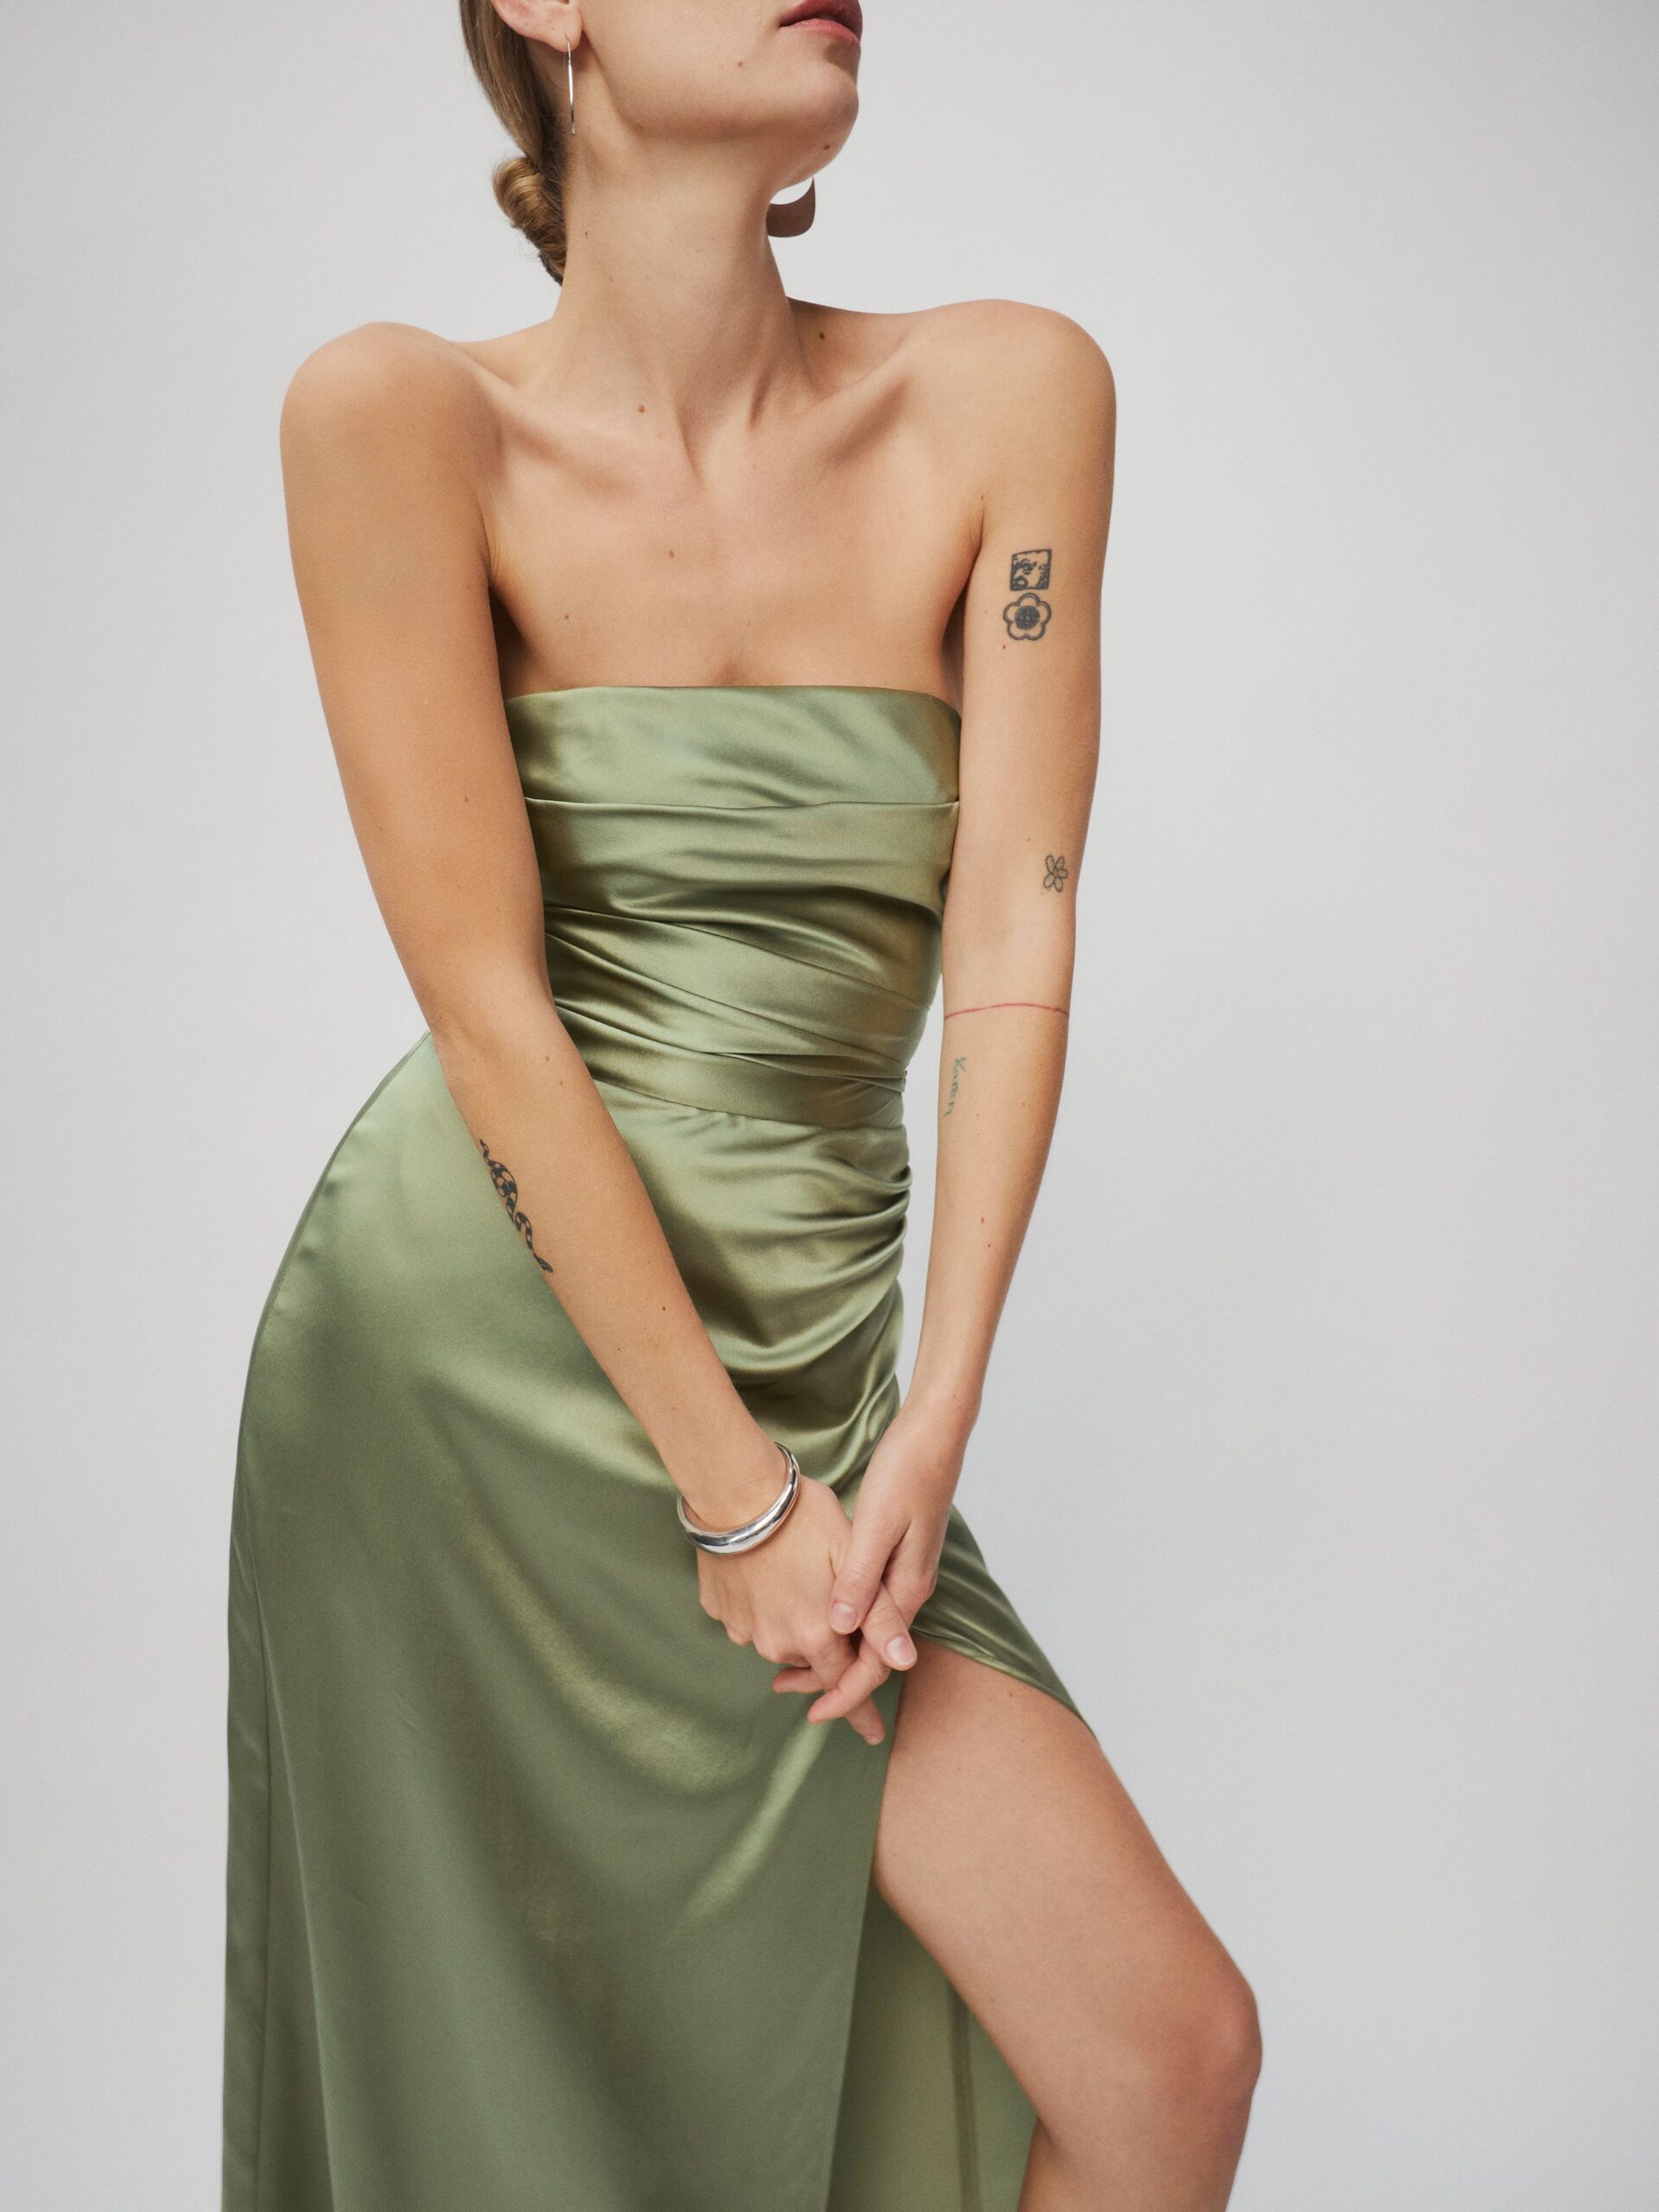 Make a Statement with Strapless Dresses for Every Occasion